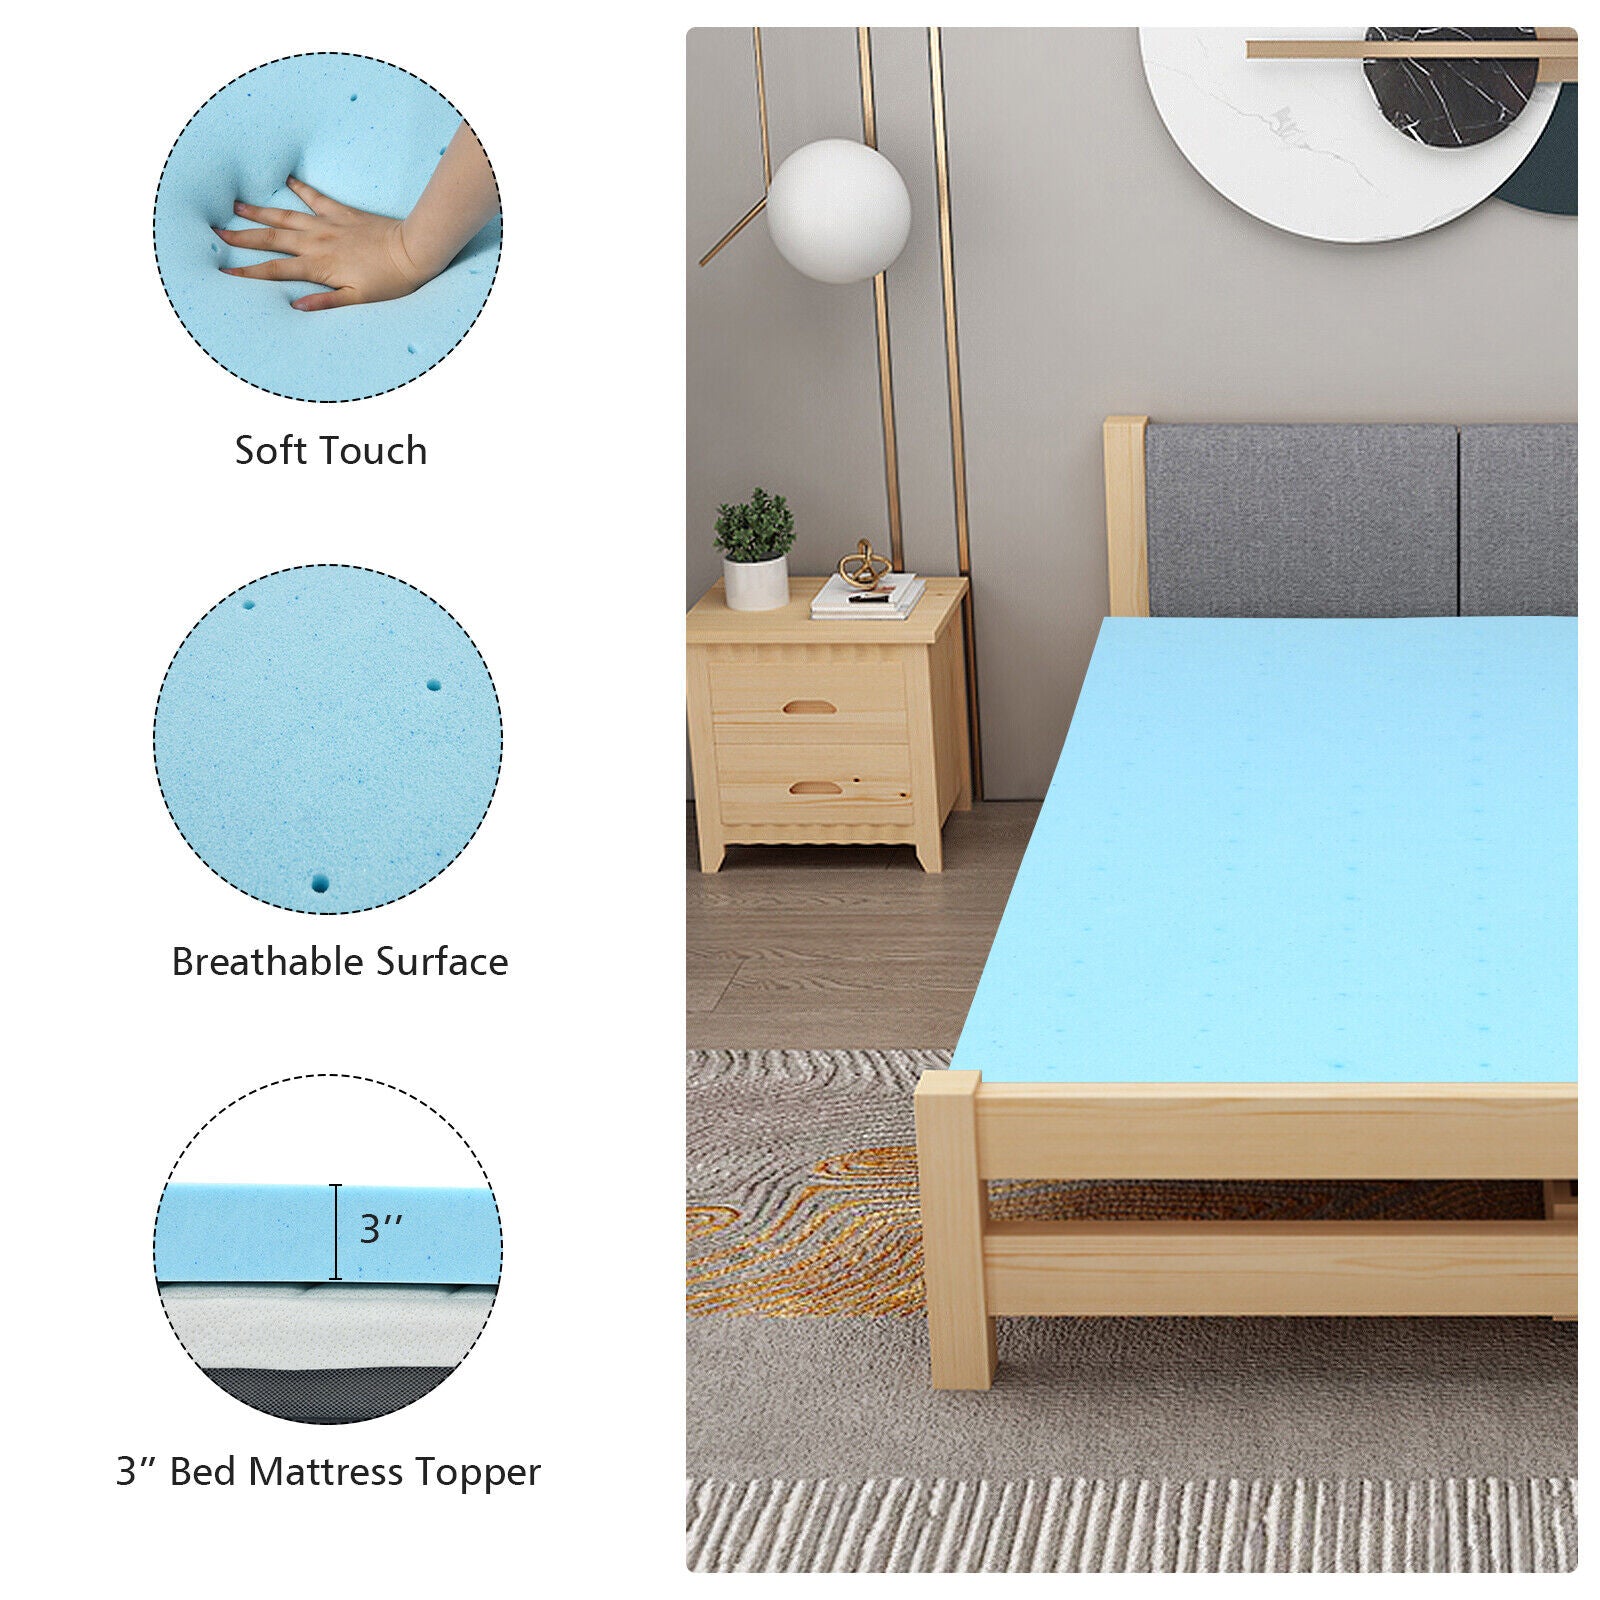 Mattress Topper with Air Ventilation - Gel Infused Mattress Pad